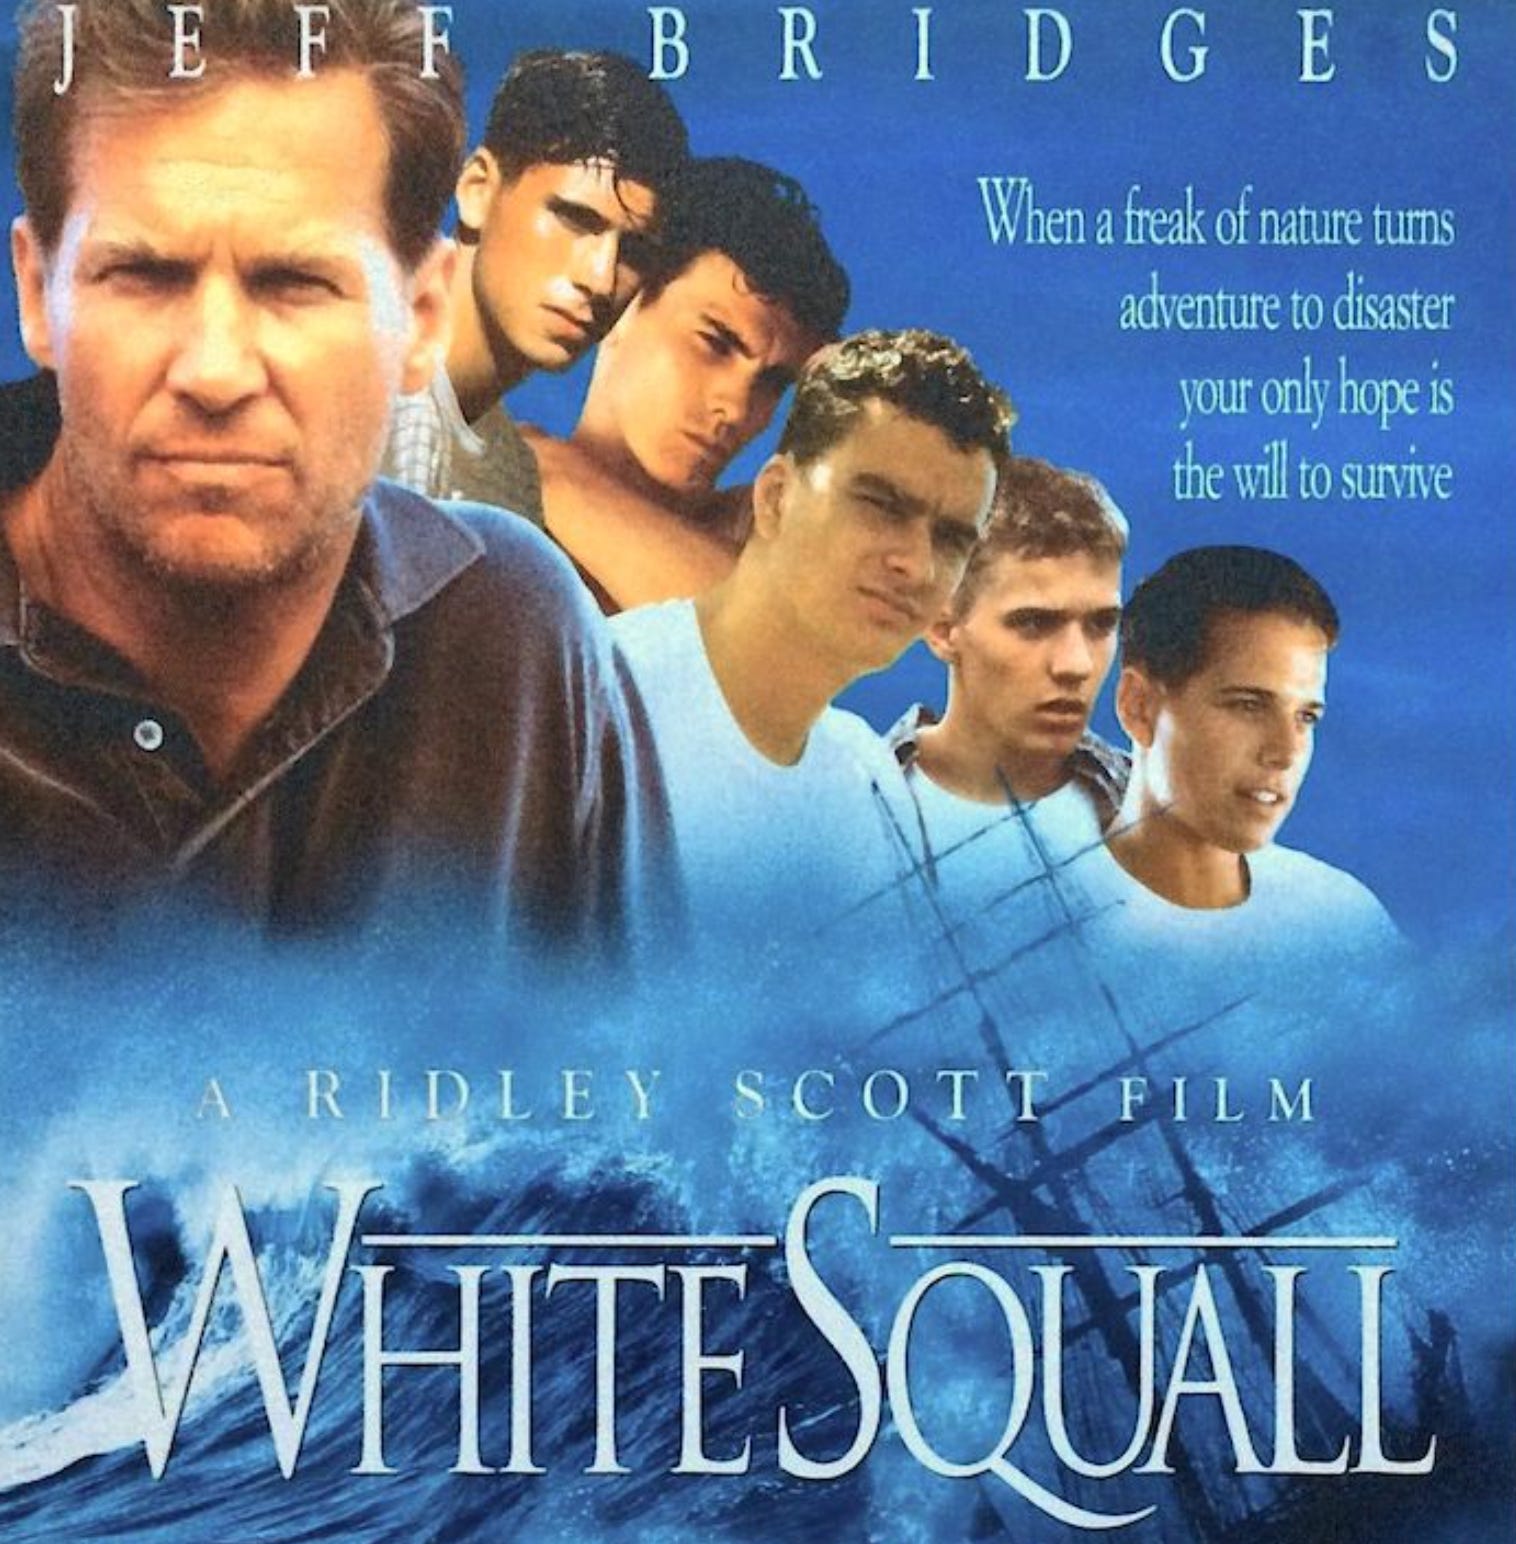 The Significance of White Squall – American Hypnotist